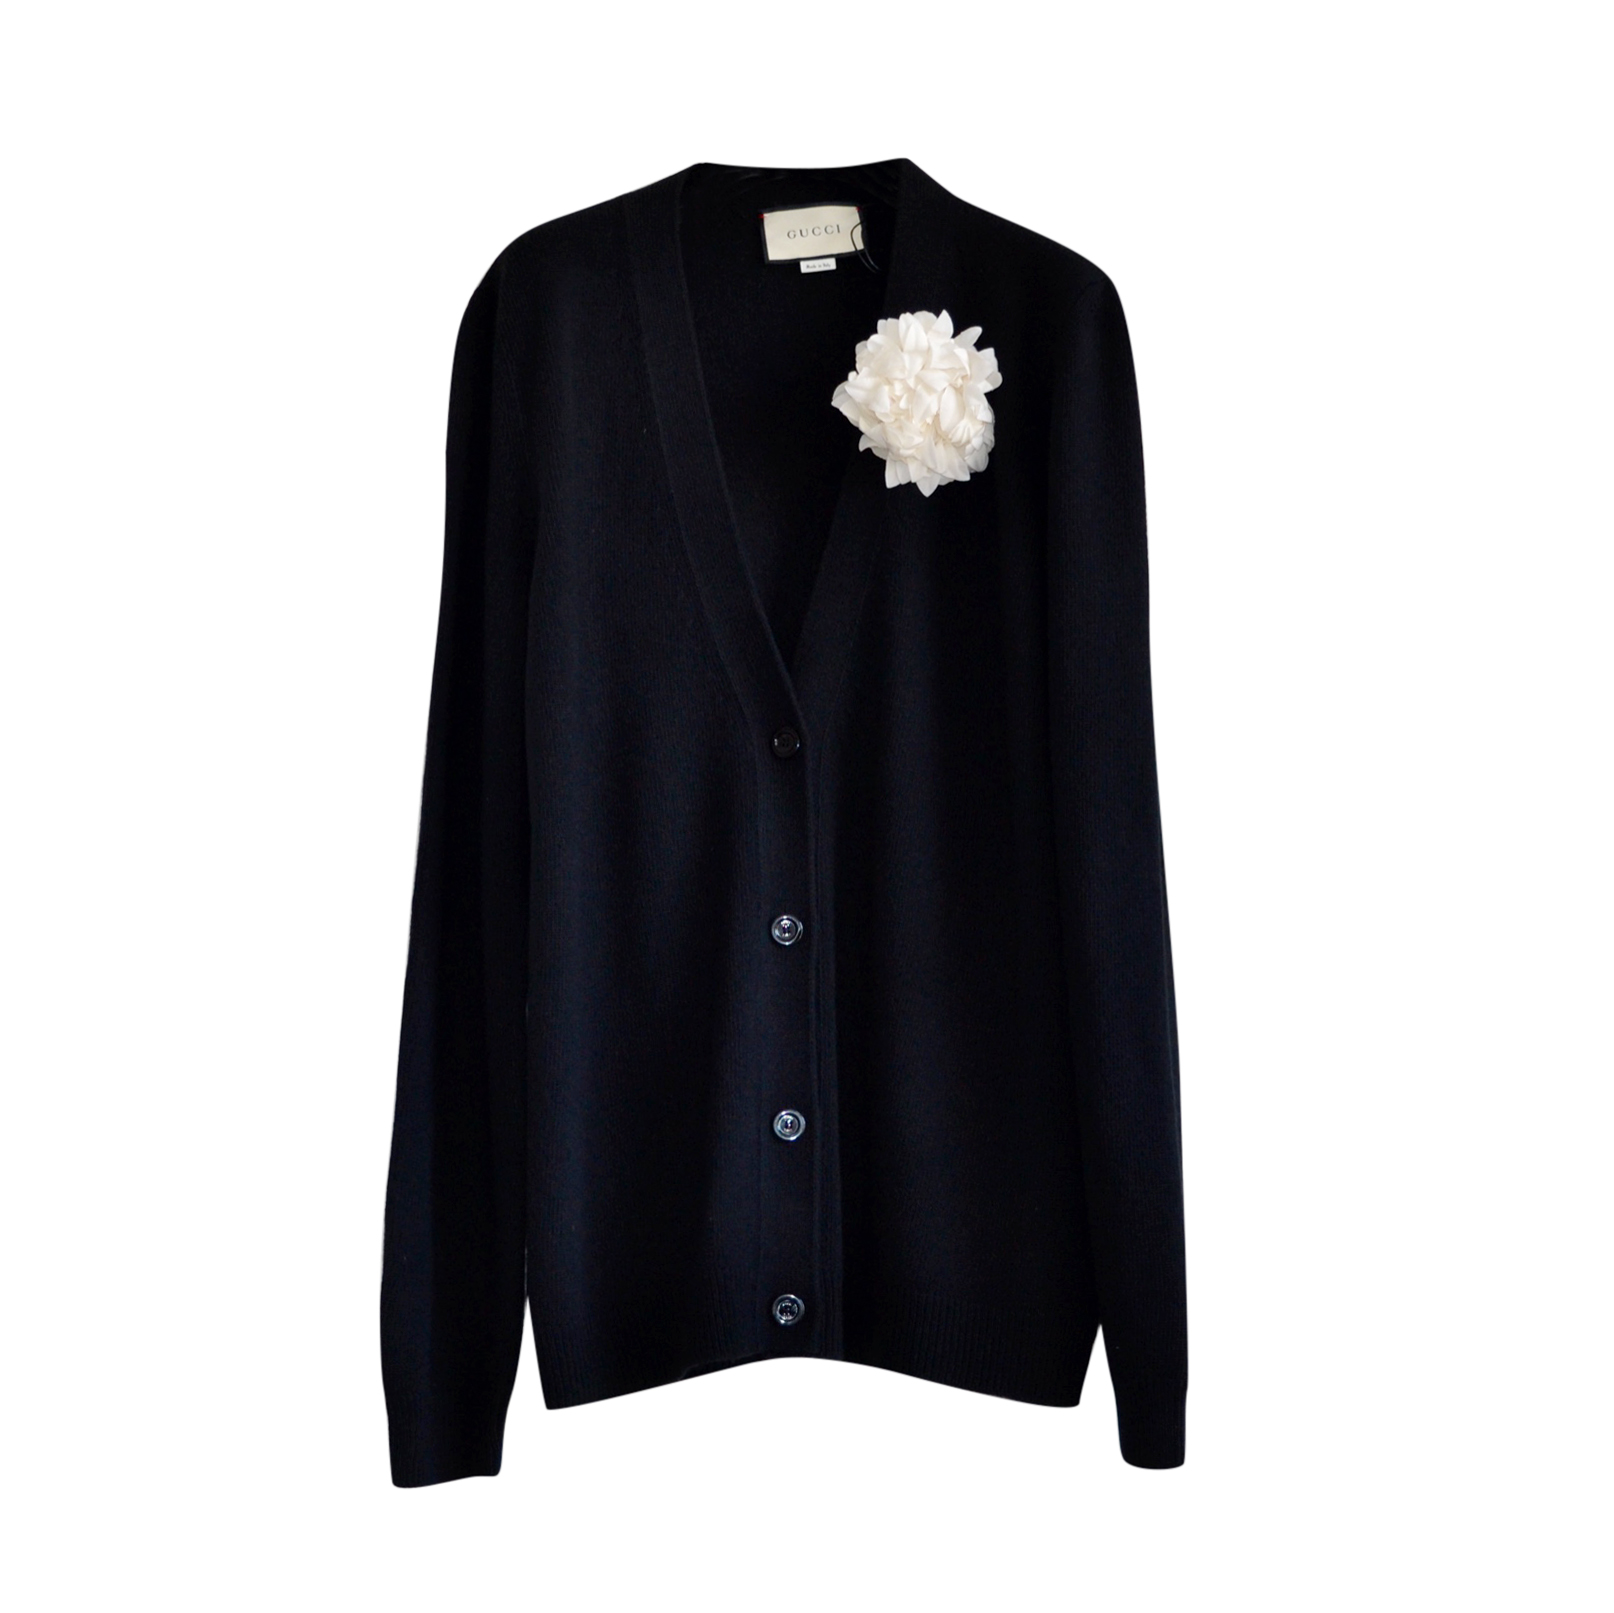 Gucci Wool & Cashmere Knit Black Cardigan with White Flower Brooch